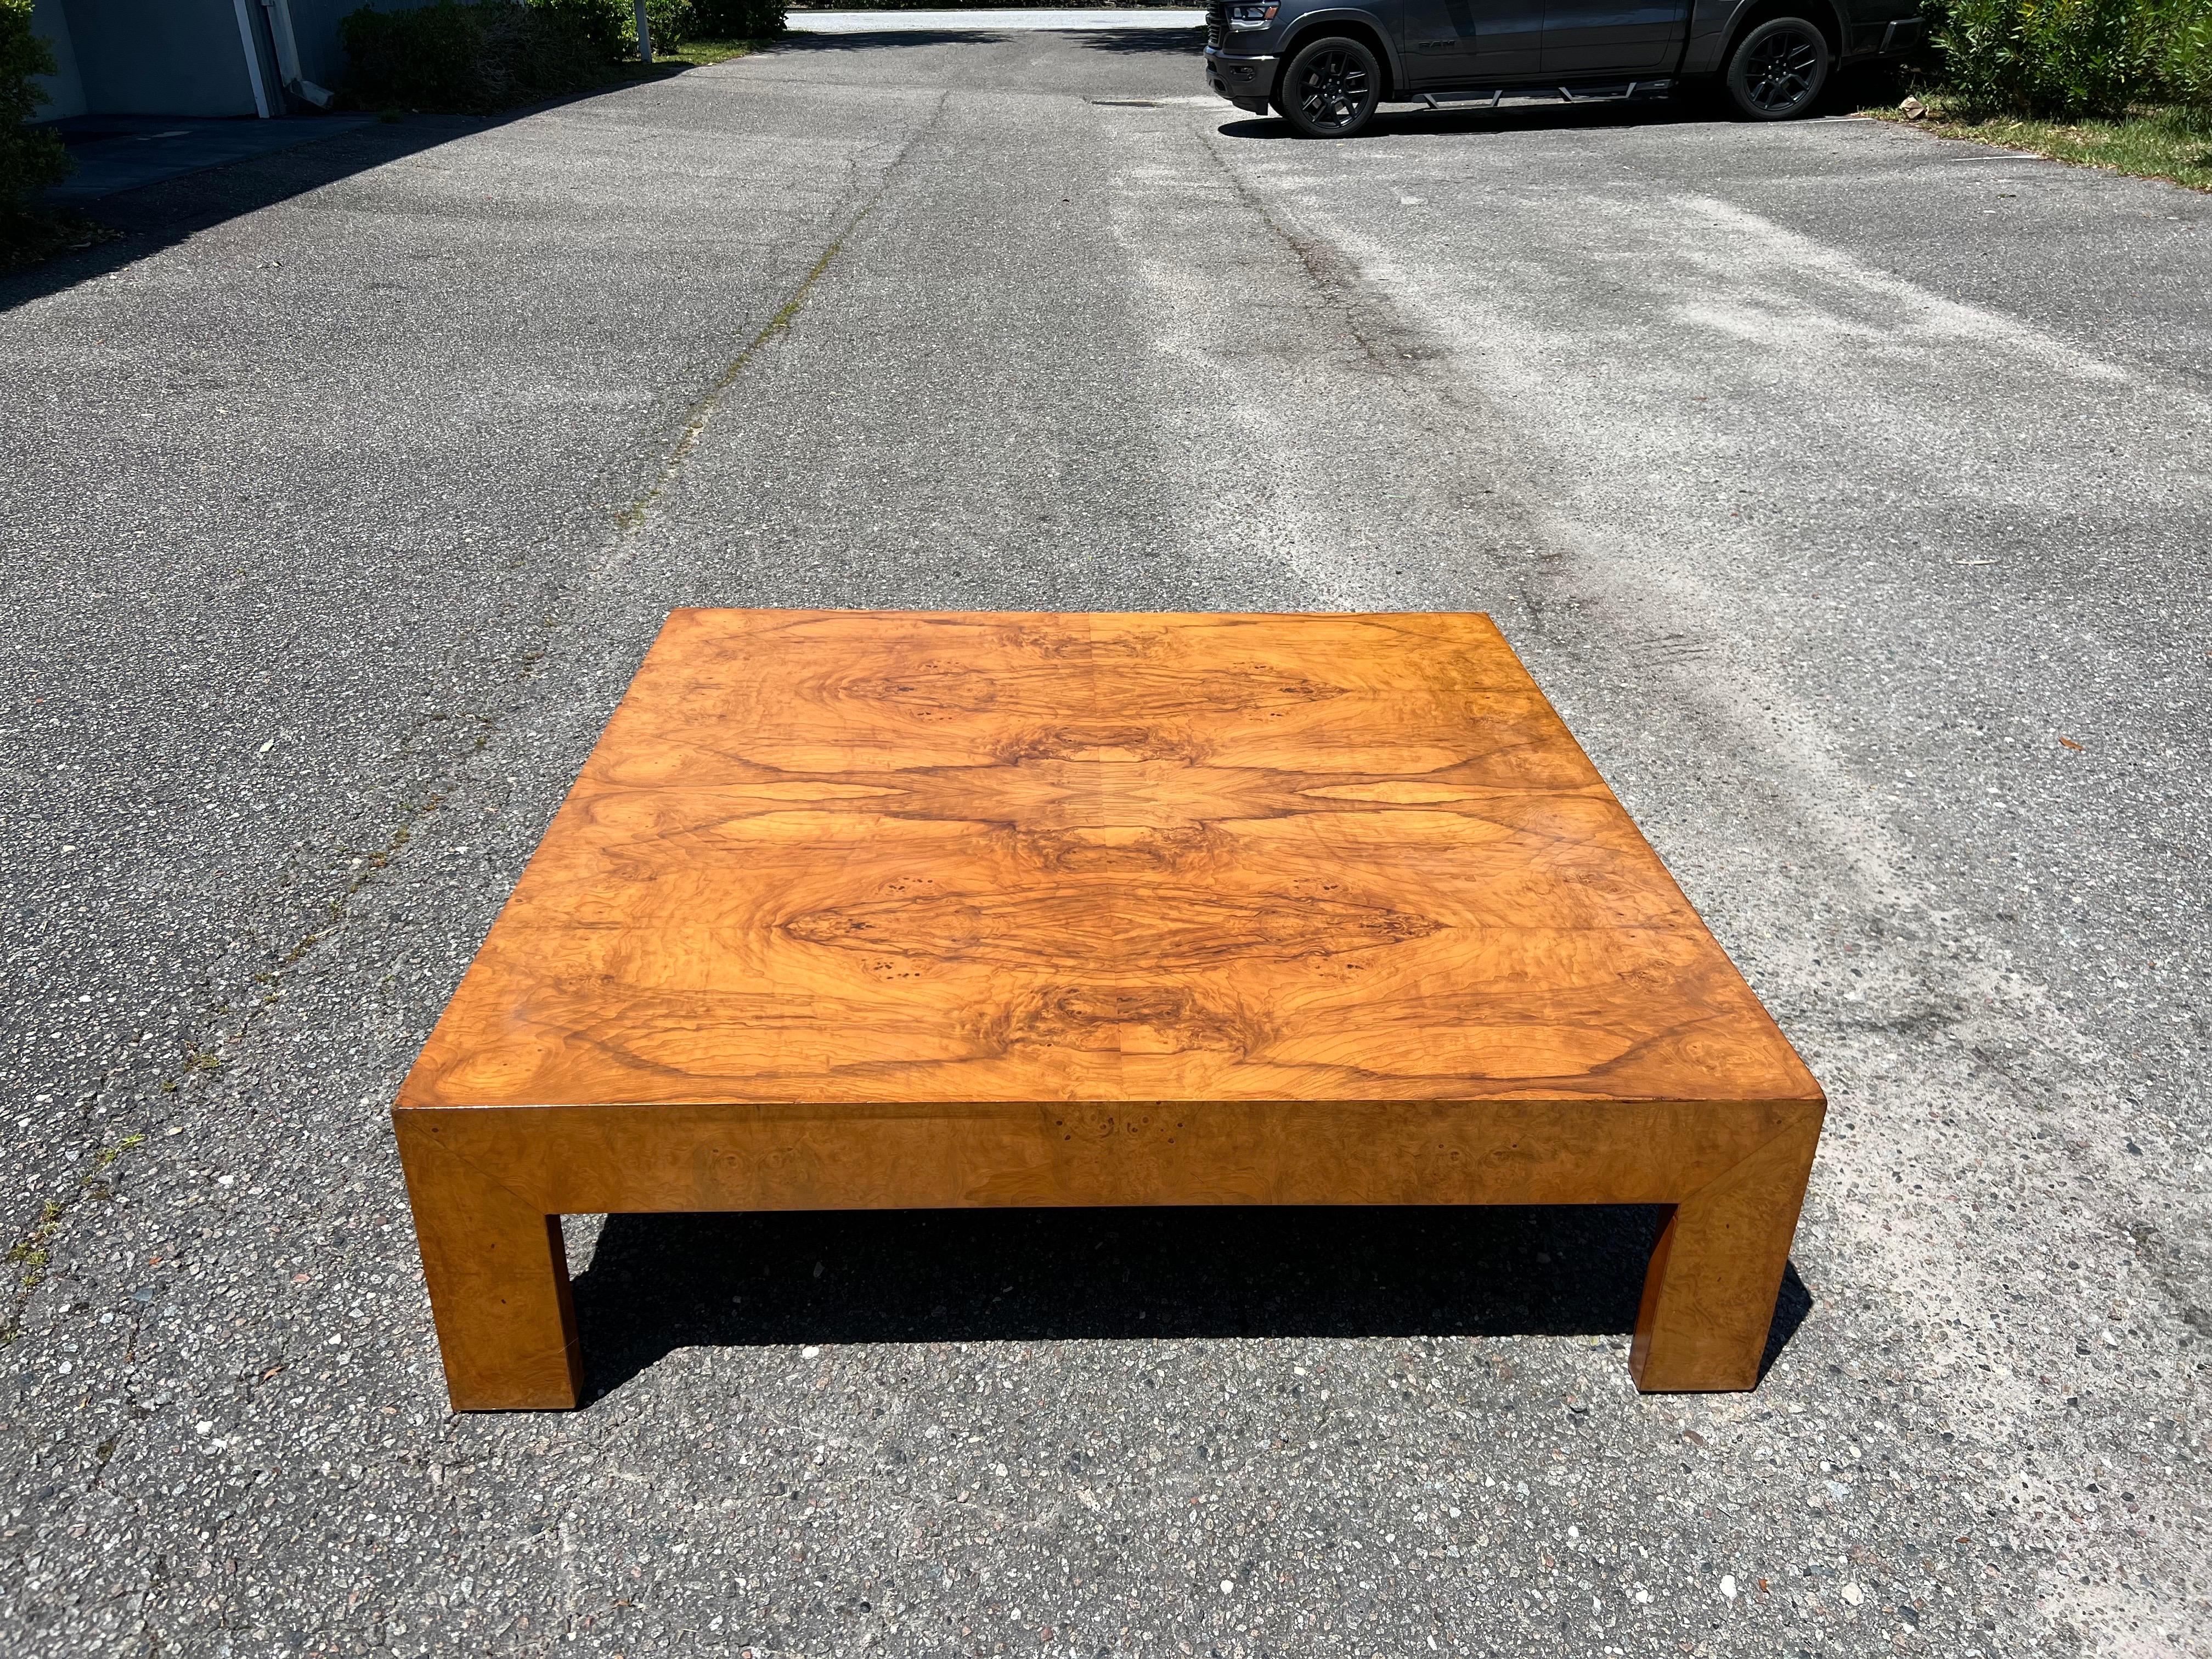 Large scale burl wood coffee table, designed by Milo Baughman for Thayer Coggin, American, circa 1960s. This large-scale table was made for entertaining and the burled wood graining is beautiful. It measures an impressive 54